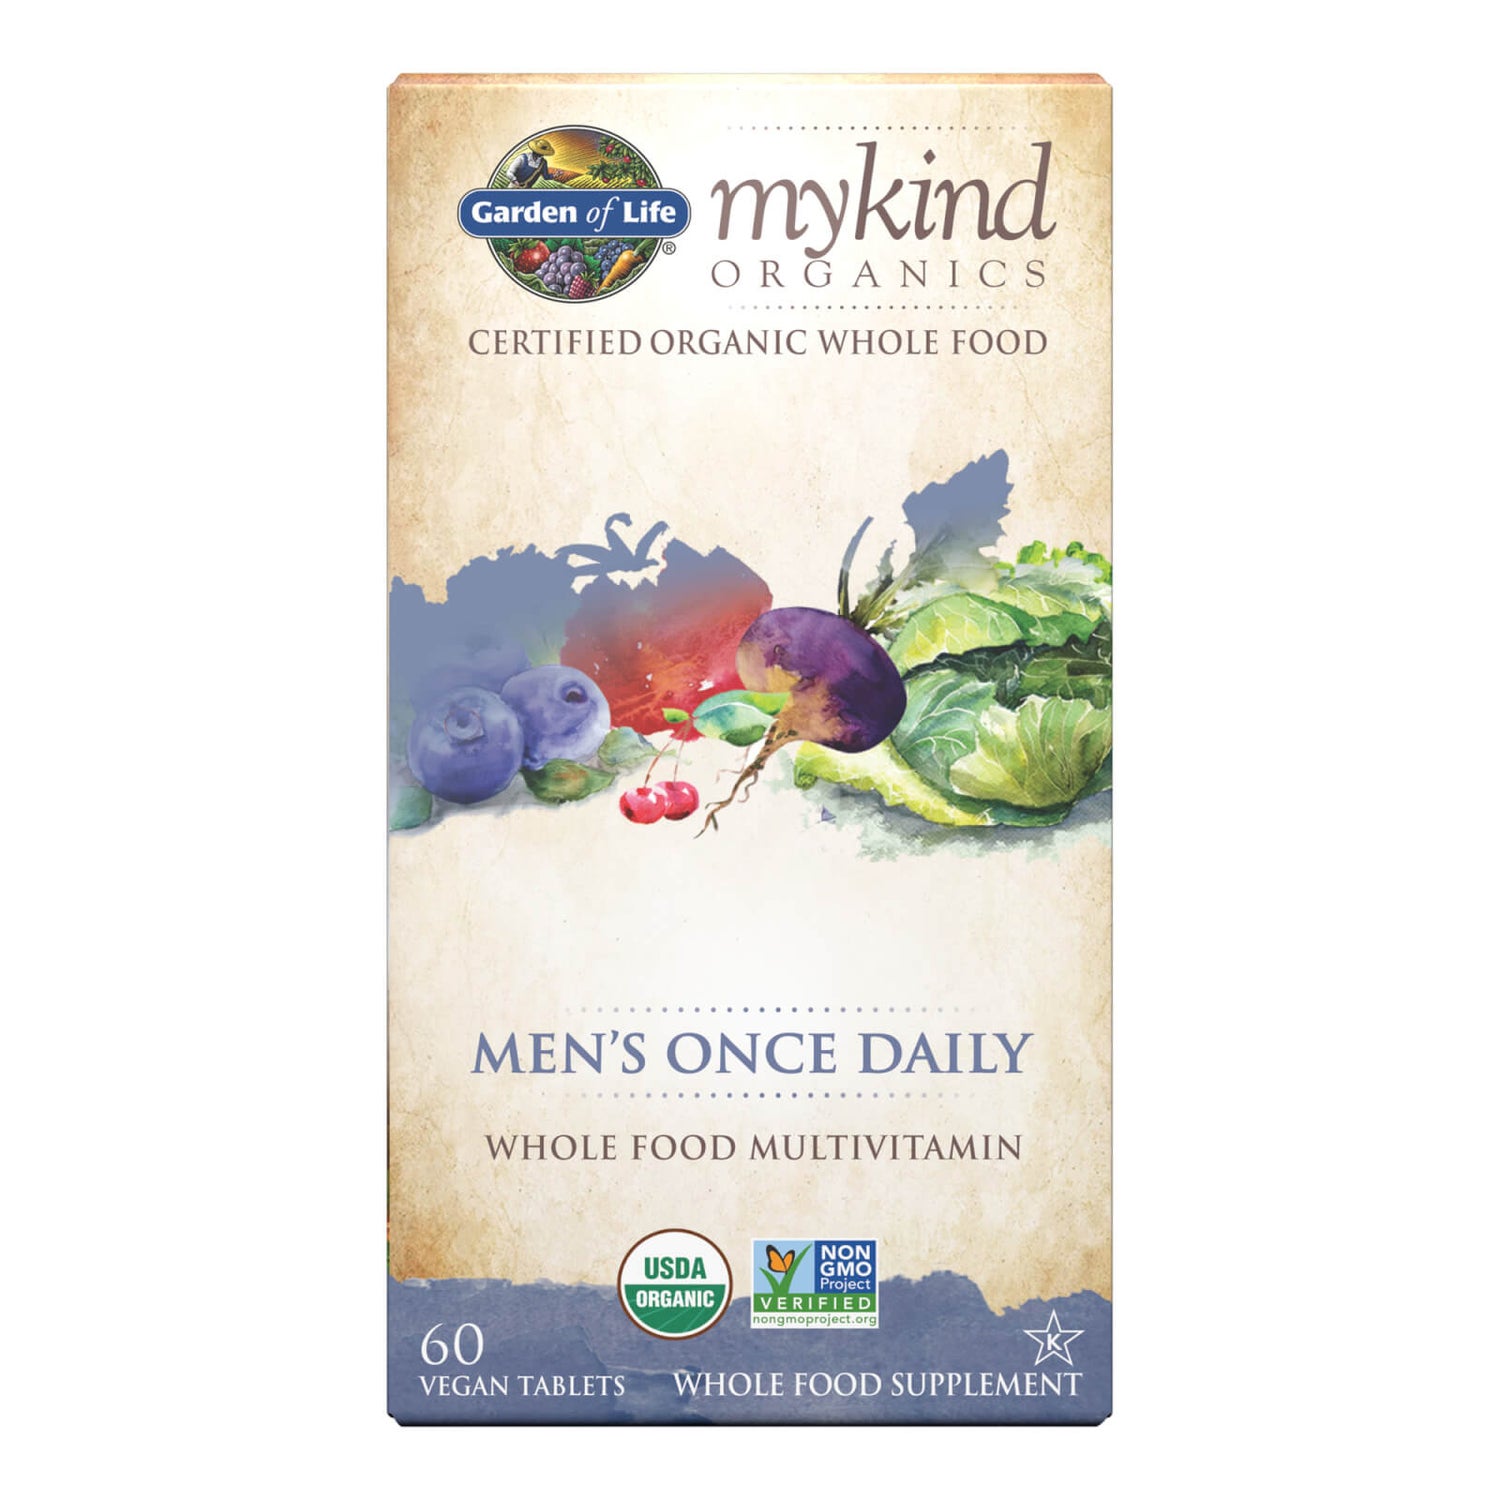 mykind Organics Men's Once Daily - 60 Tablets